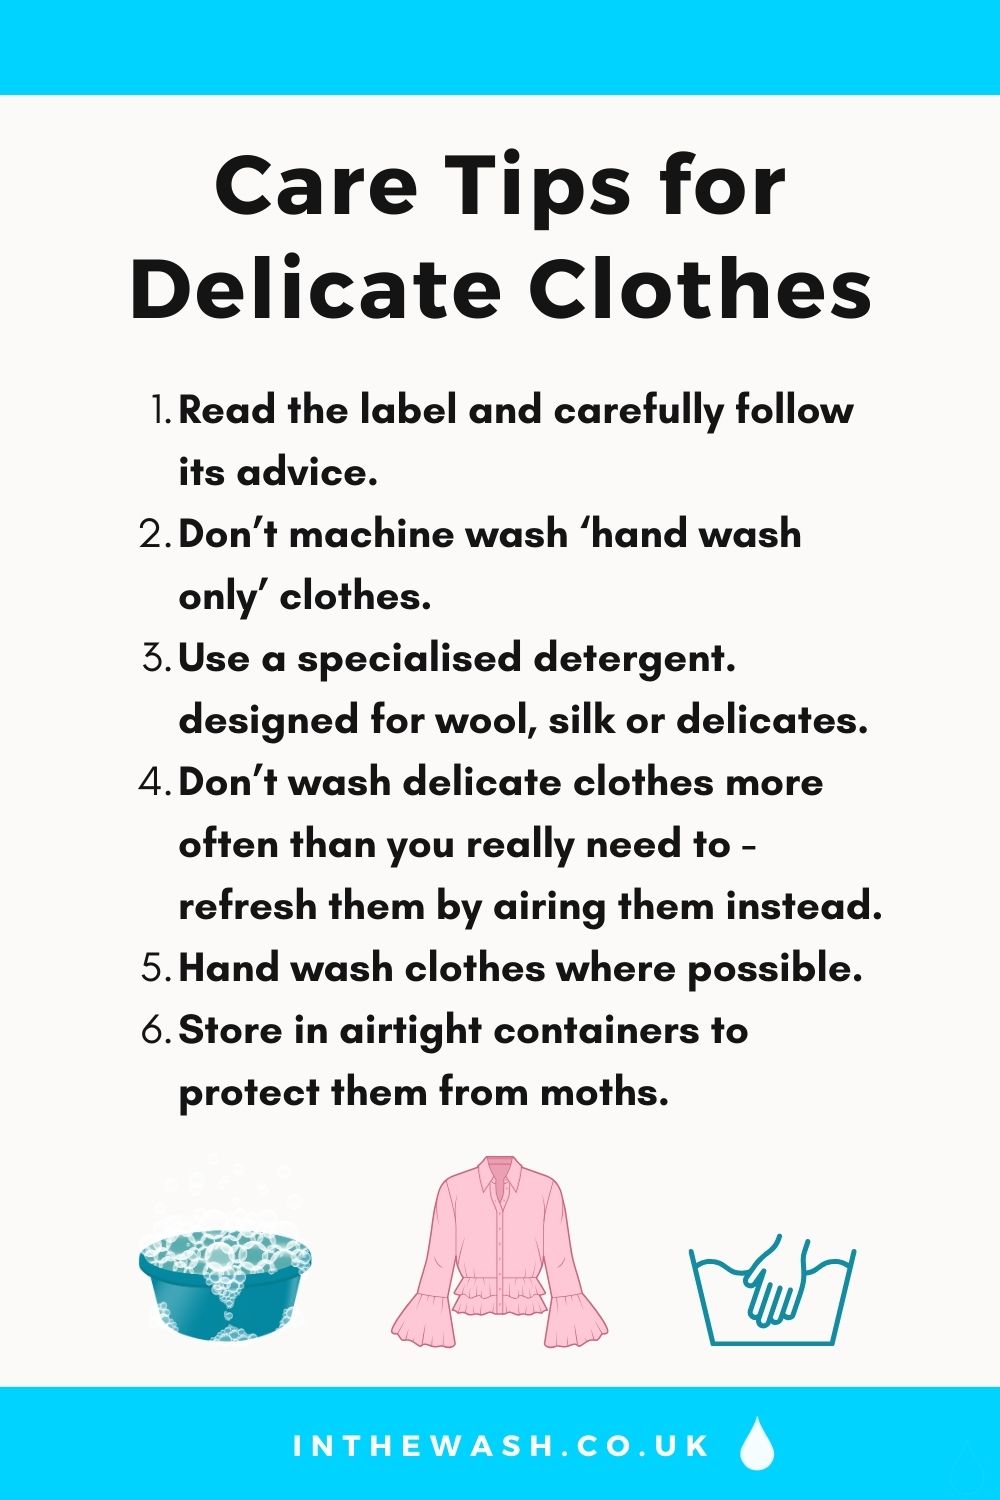 Care tips for delicate clothes